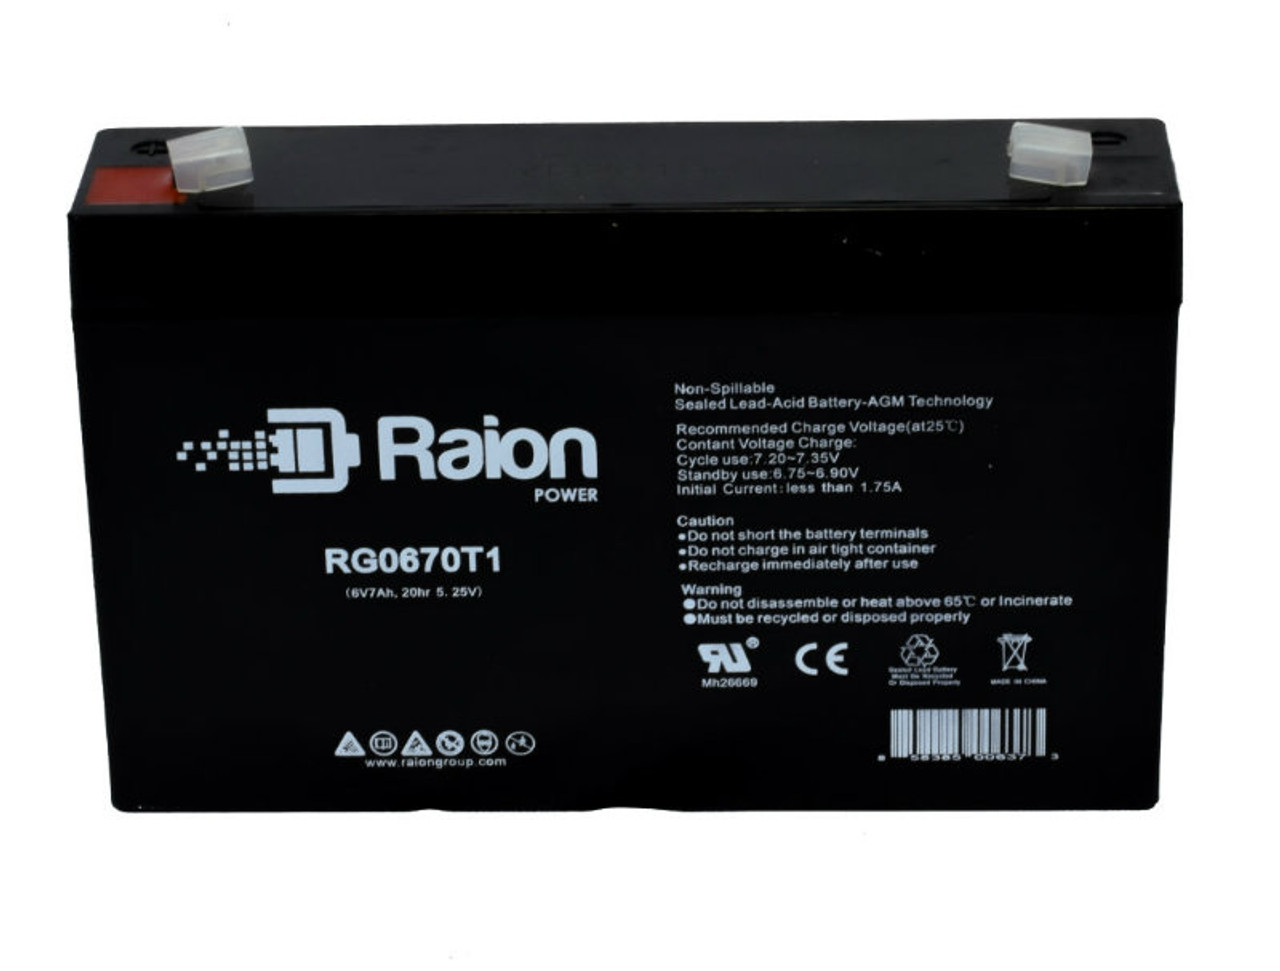 Raion Power RG0670T1 Replacement Battery Cartridge for Lightalarms SGLD